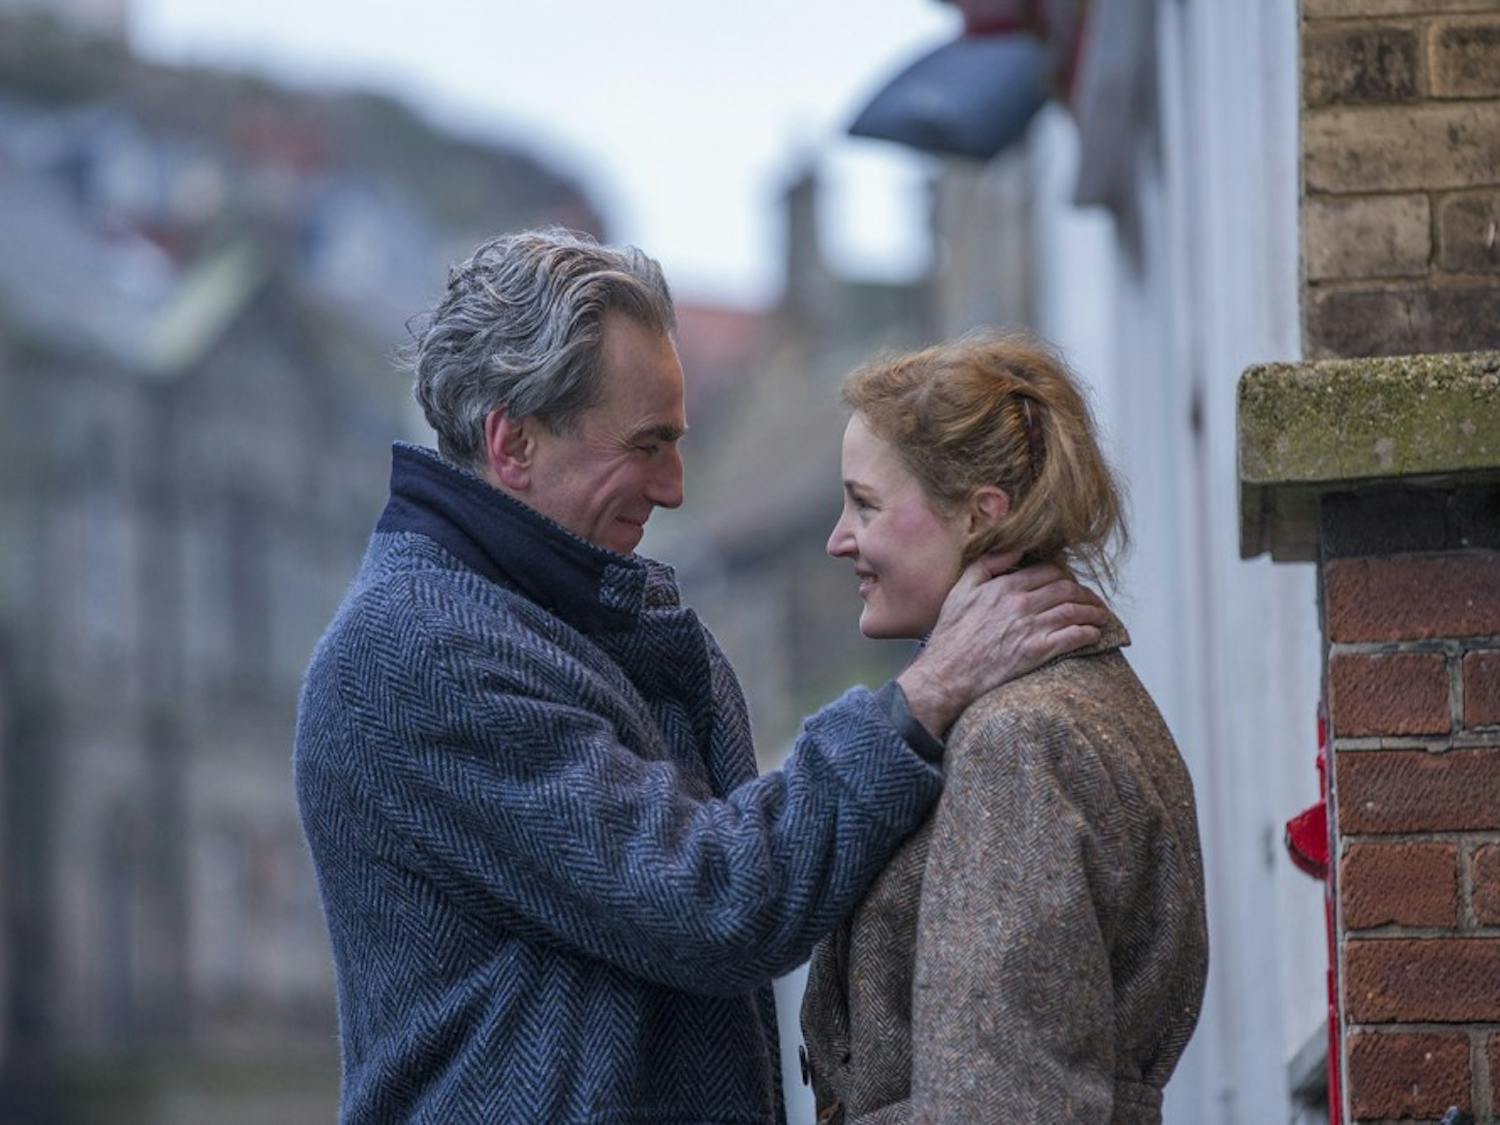 Daniel Day-Lewis stars as Reynolds Woodcock and Vicky Krieps stars as Alma in the film, &quot;Phantom Thread.&quot; (Laurie Sparham/Focus Features)